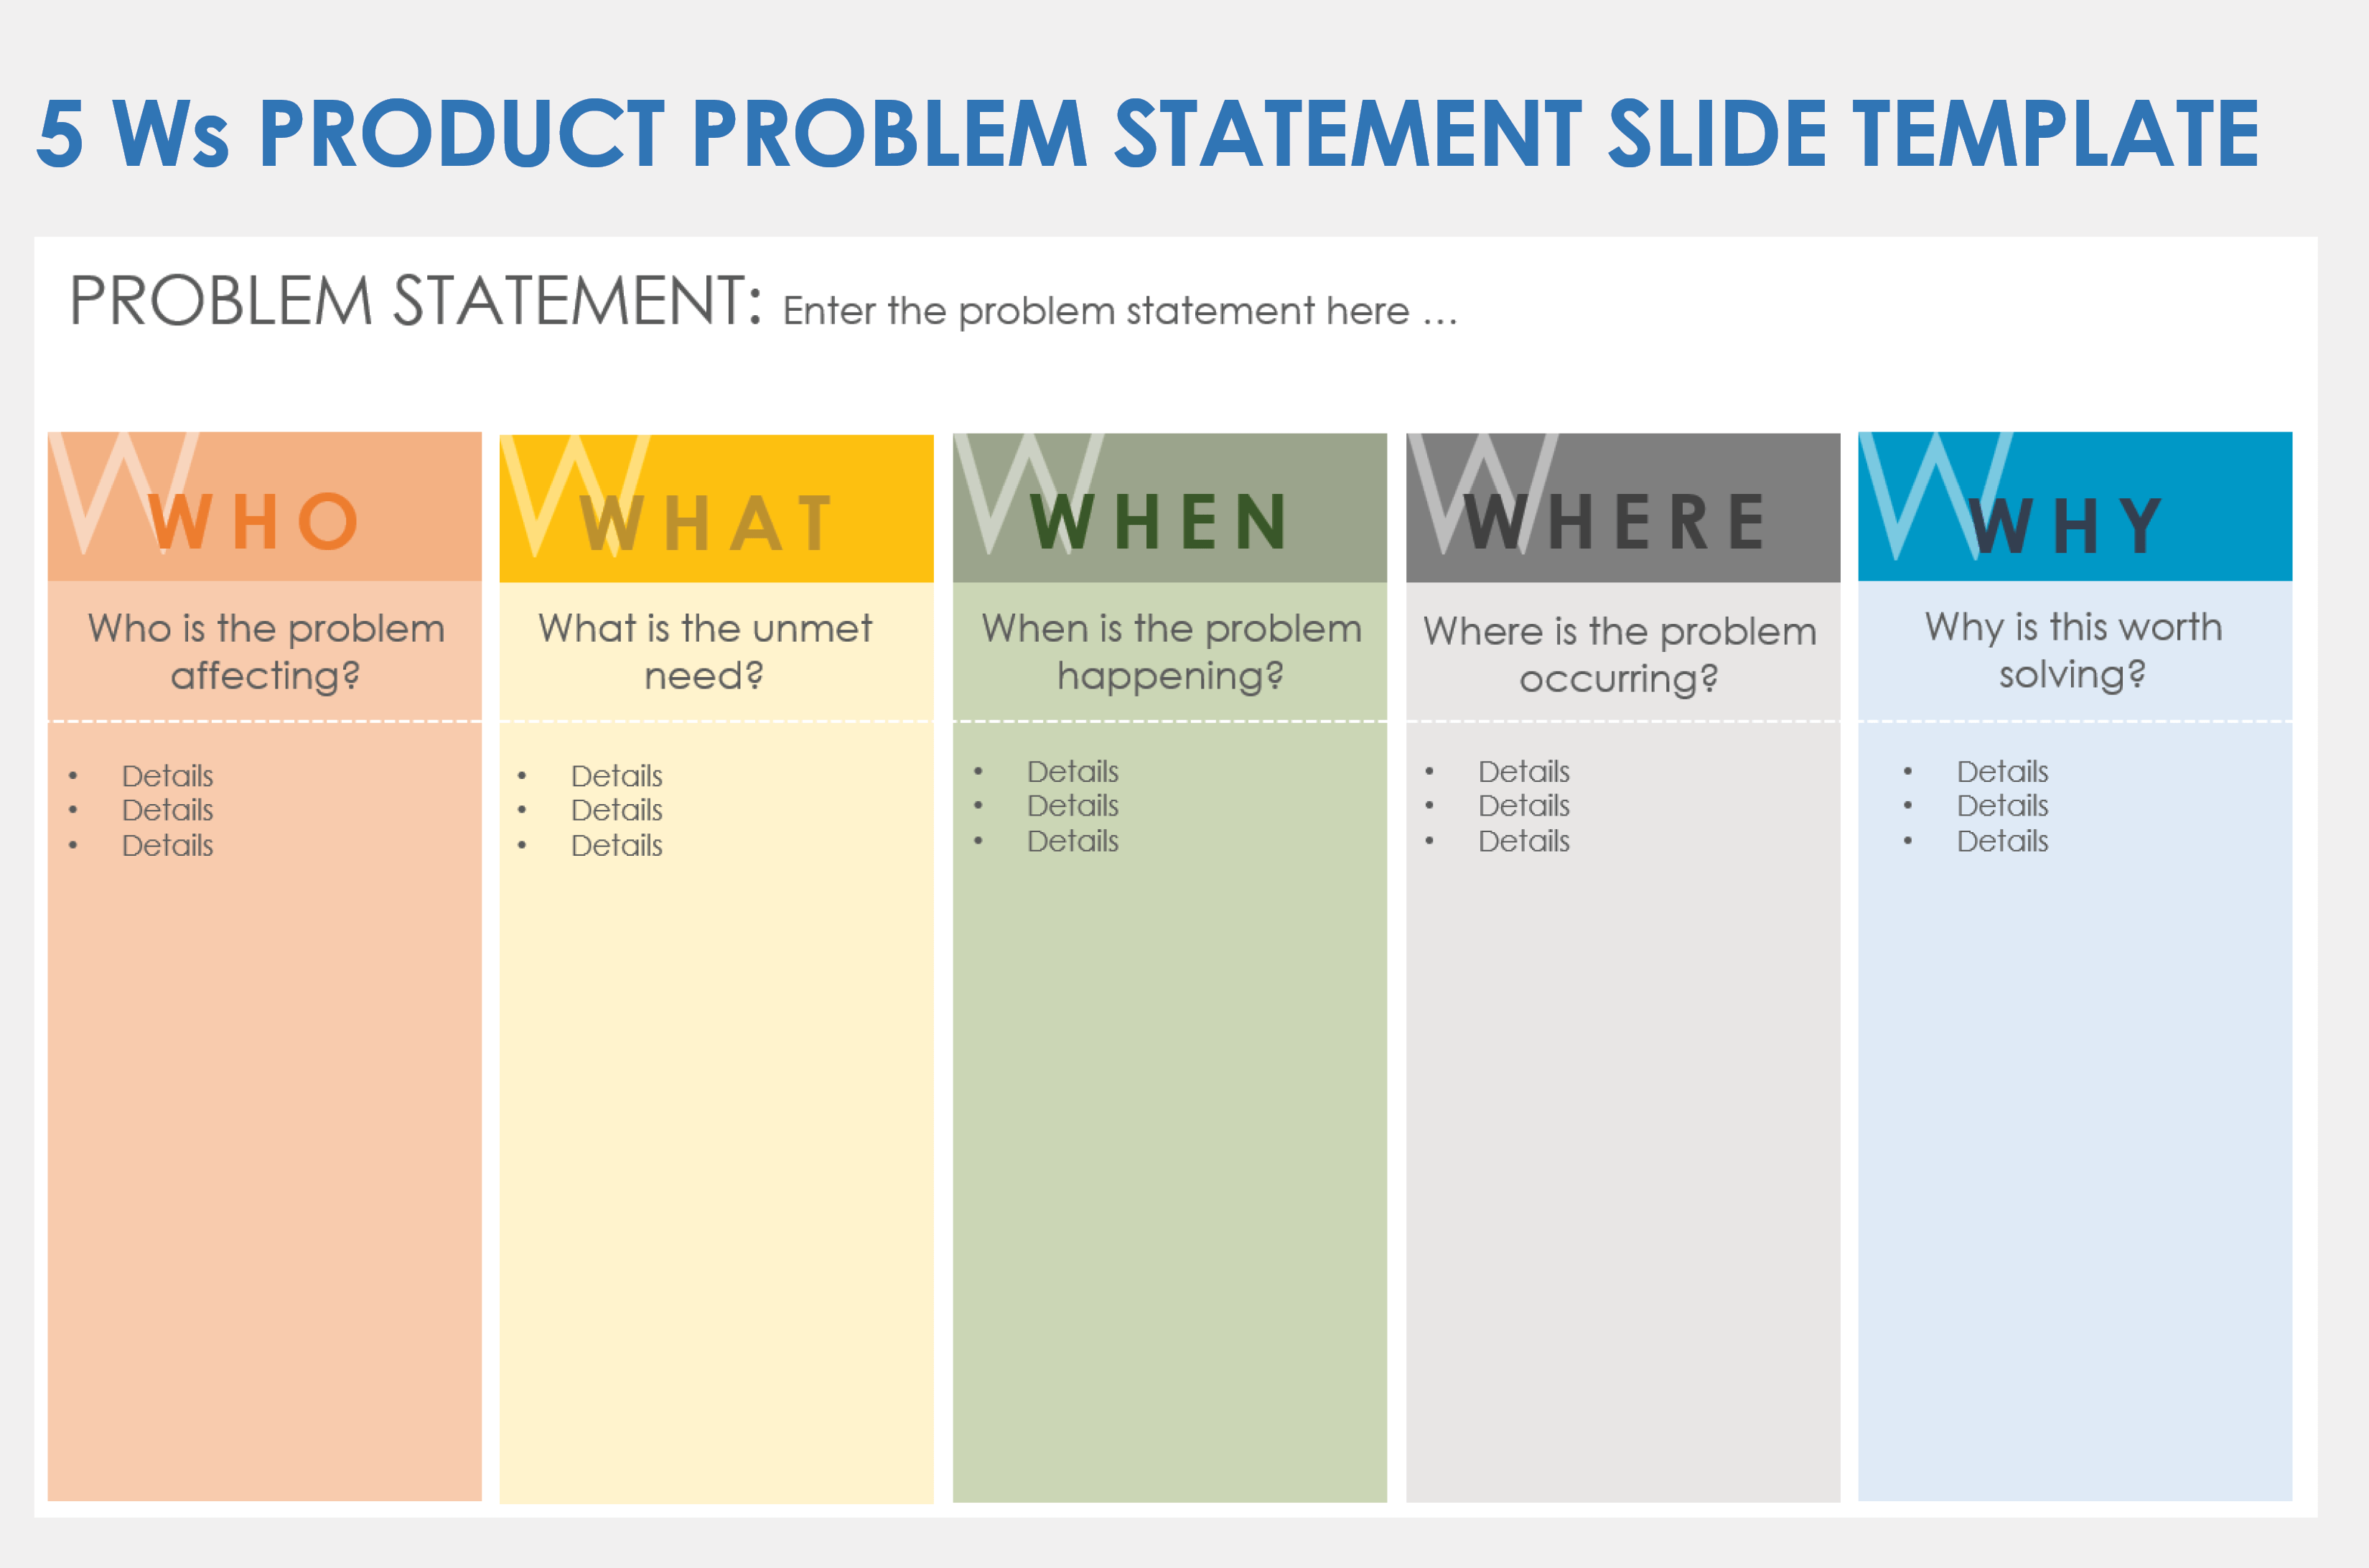 Five Ws Product Problem Statement Slide Template